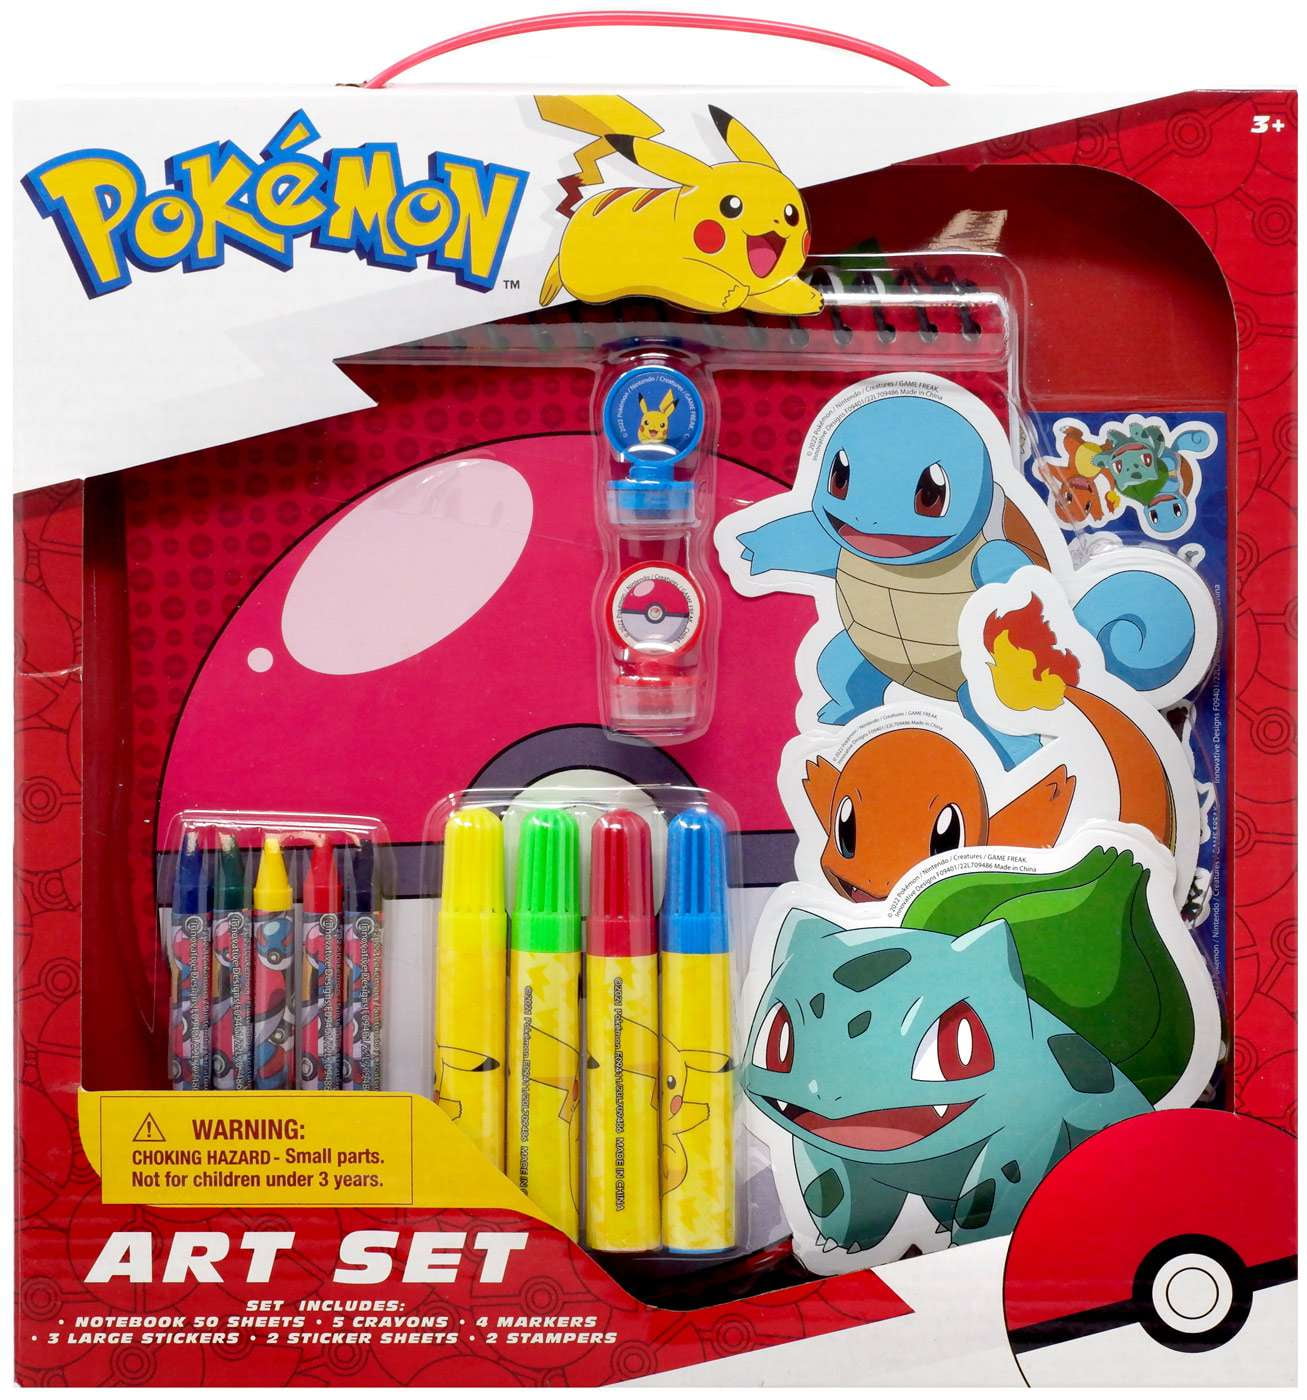 Pokemon Coloring and Activity Set - Bundle Includes Pokemon Advanced  Coloring Book & Pokemon Stickers, 2-Sided Door Hanger, Thank You Postcard  Craft